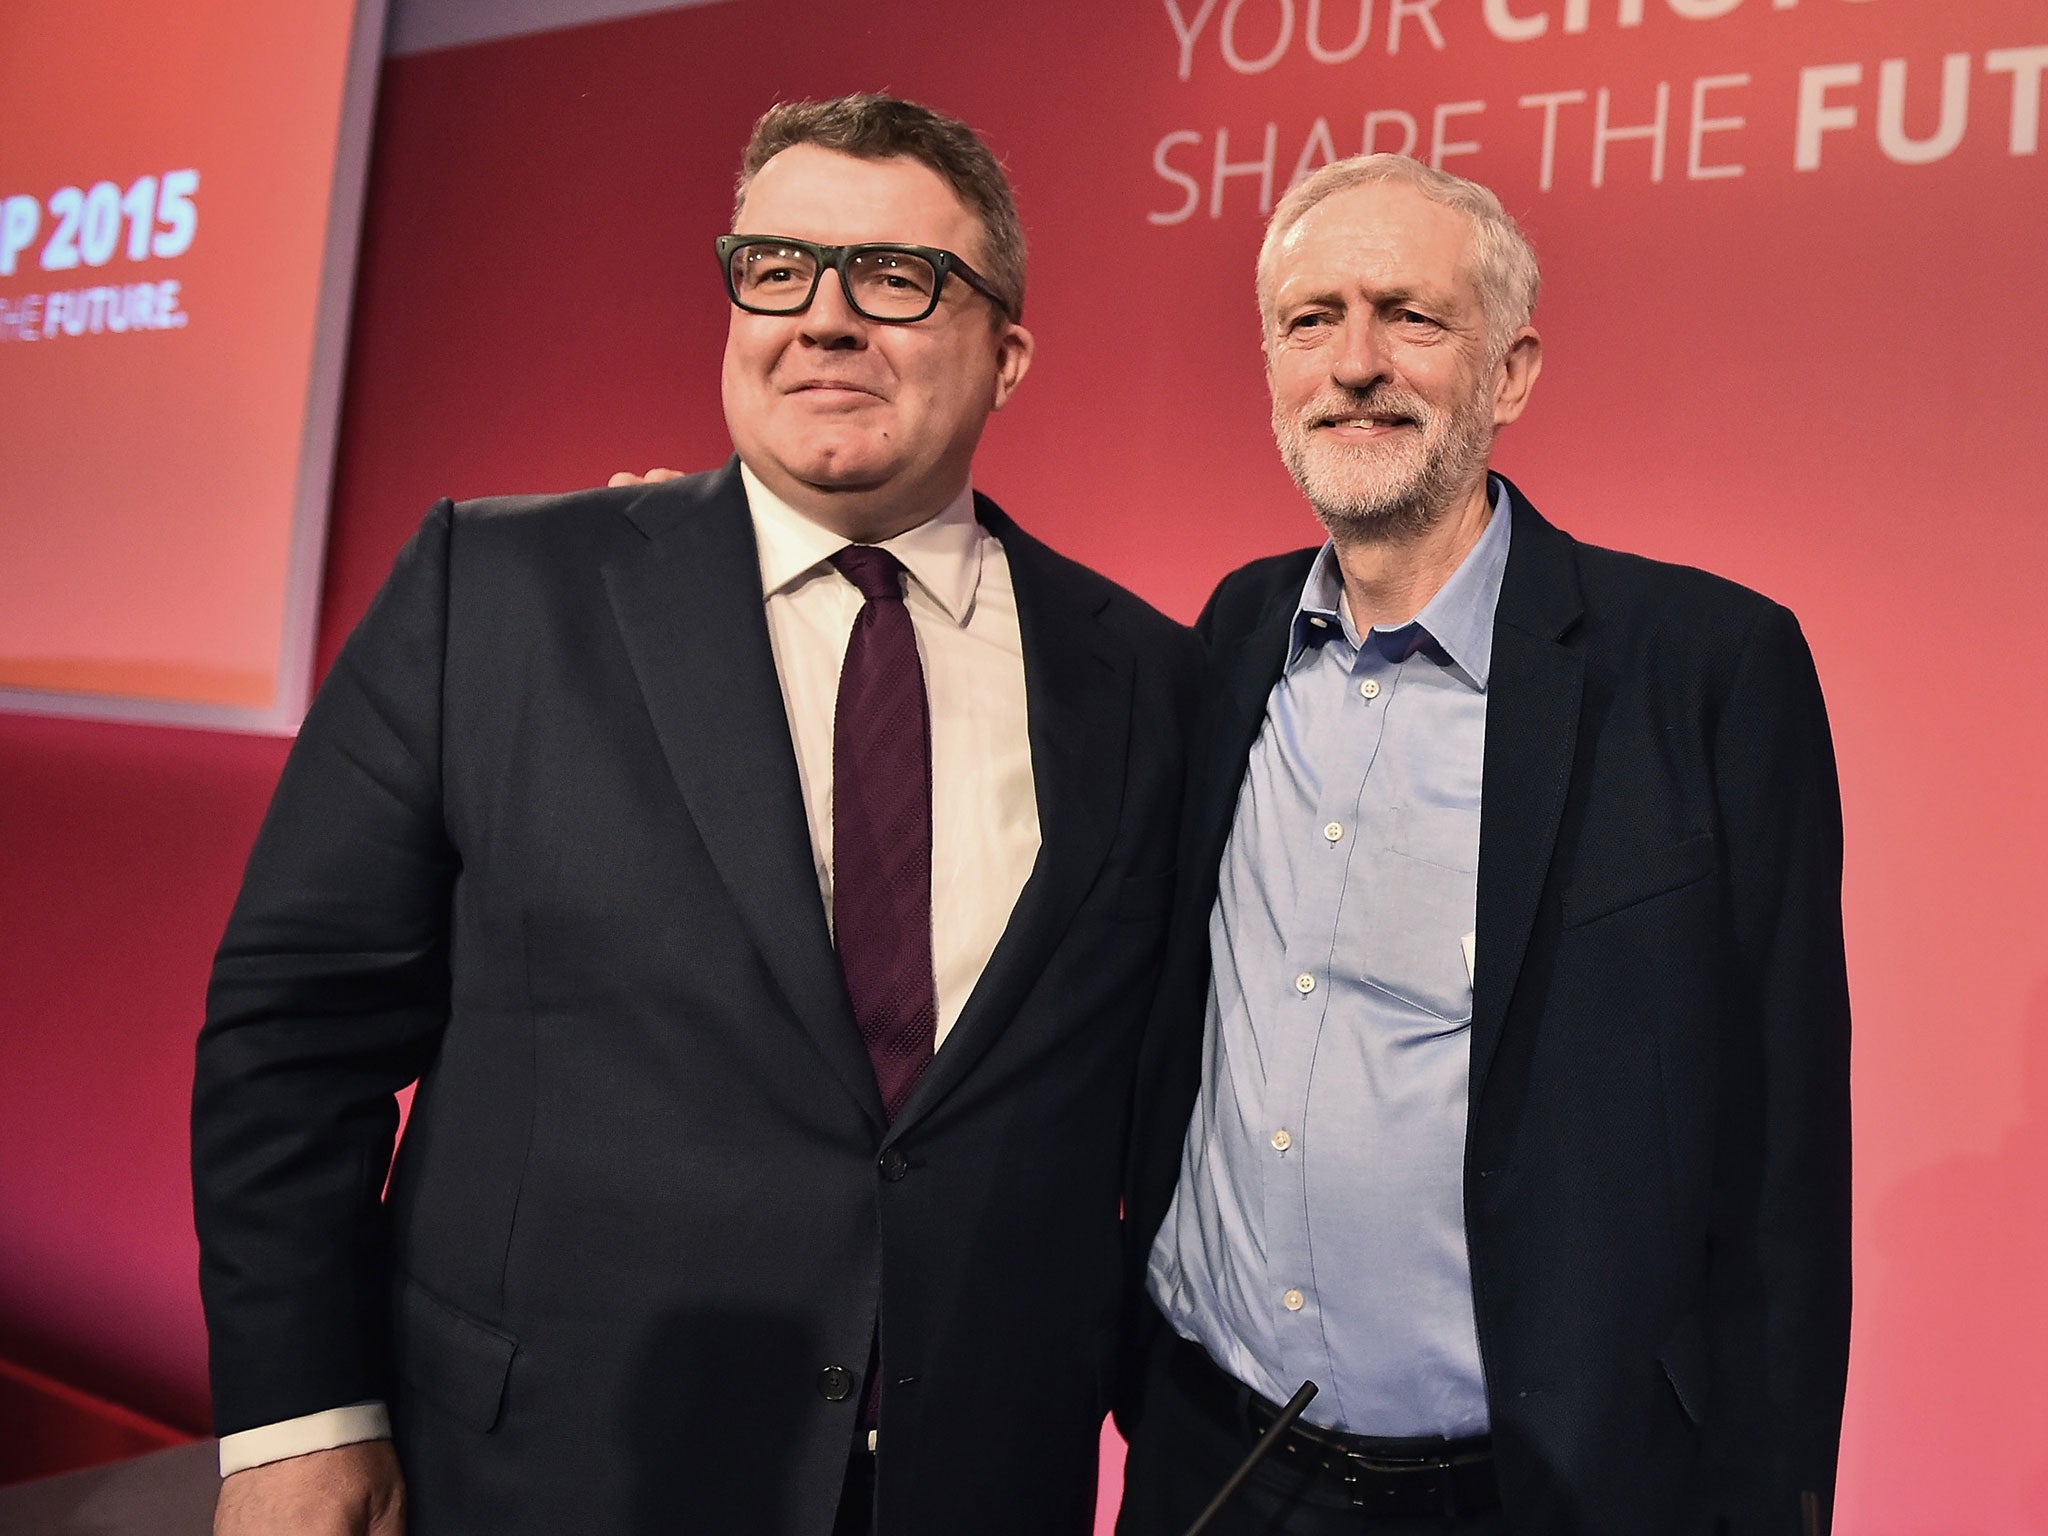 Jeremy Corbyn, right, is announced as the new leader of the Labour Party with Tom Watson, left, elected the new deputy leader